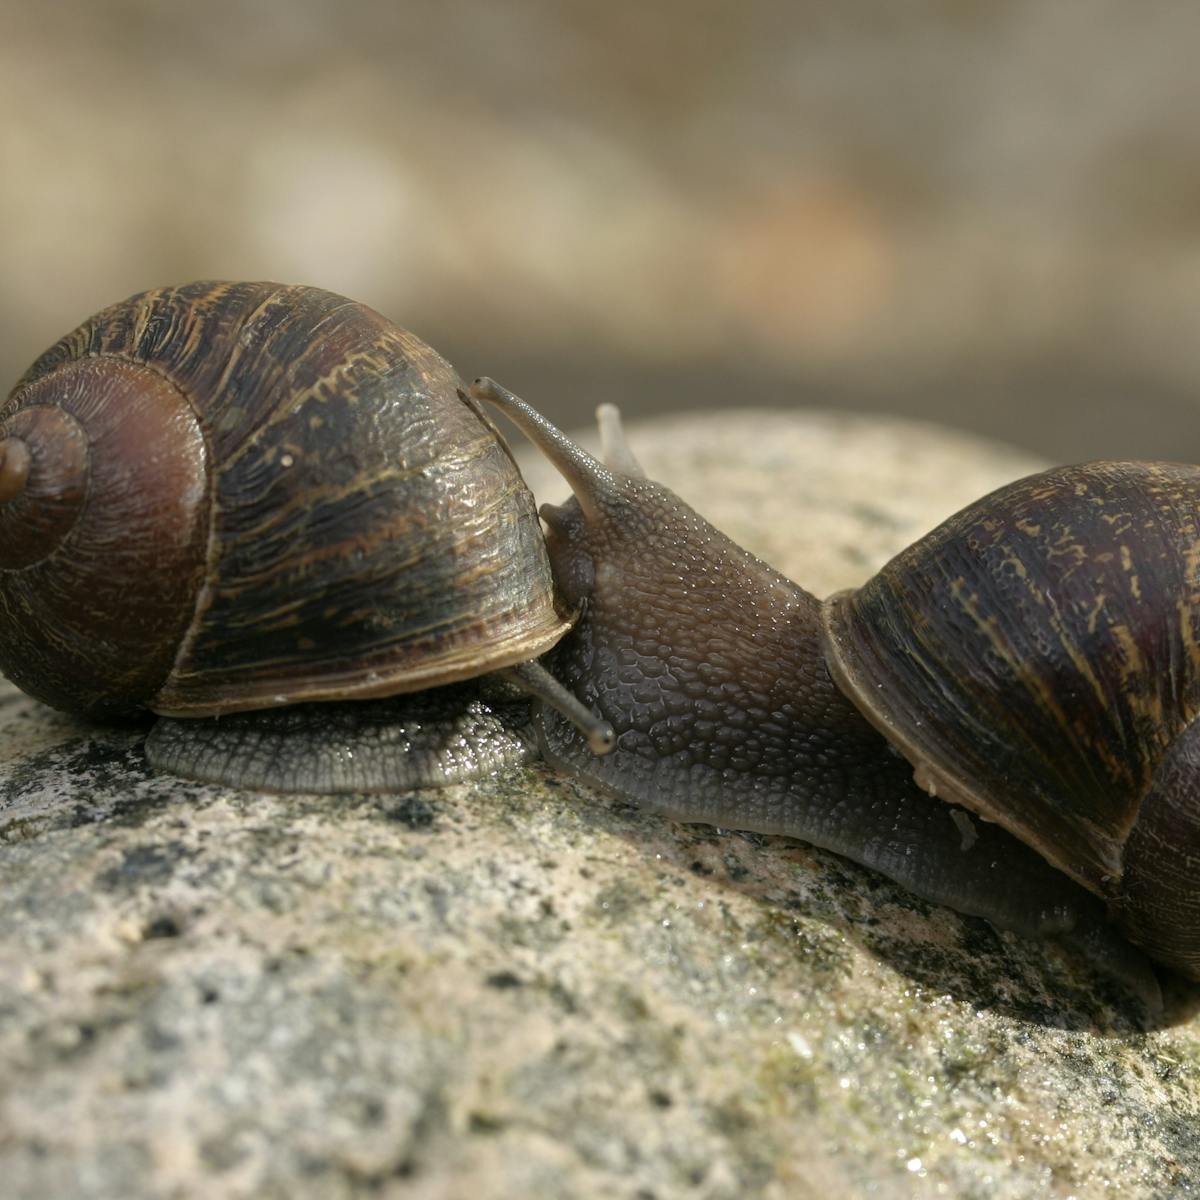 How Jeremy The Lonely Snail Showed That Two Lefts Make A Right